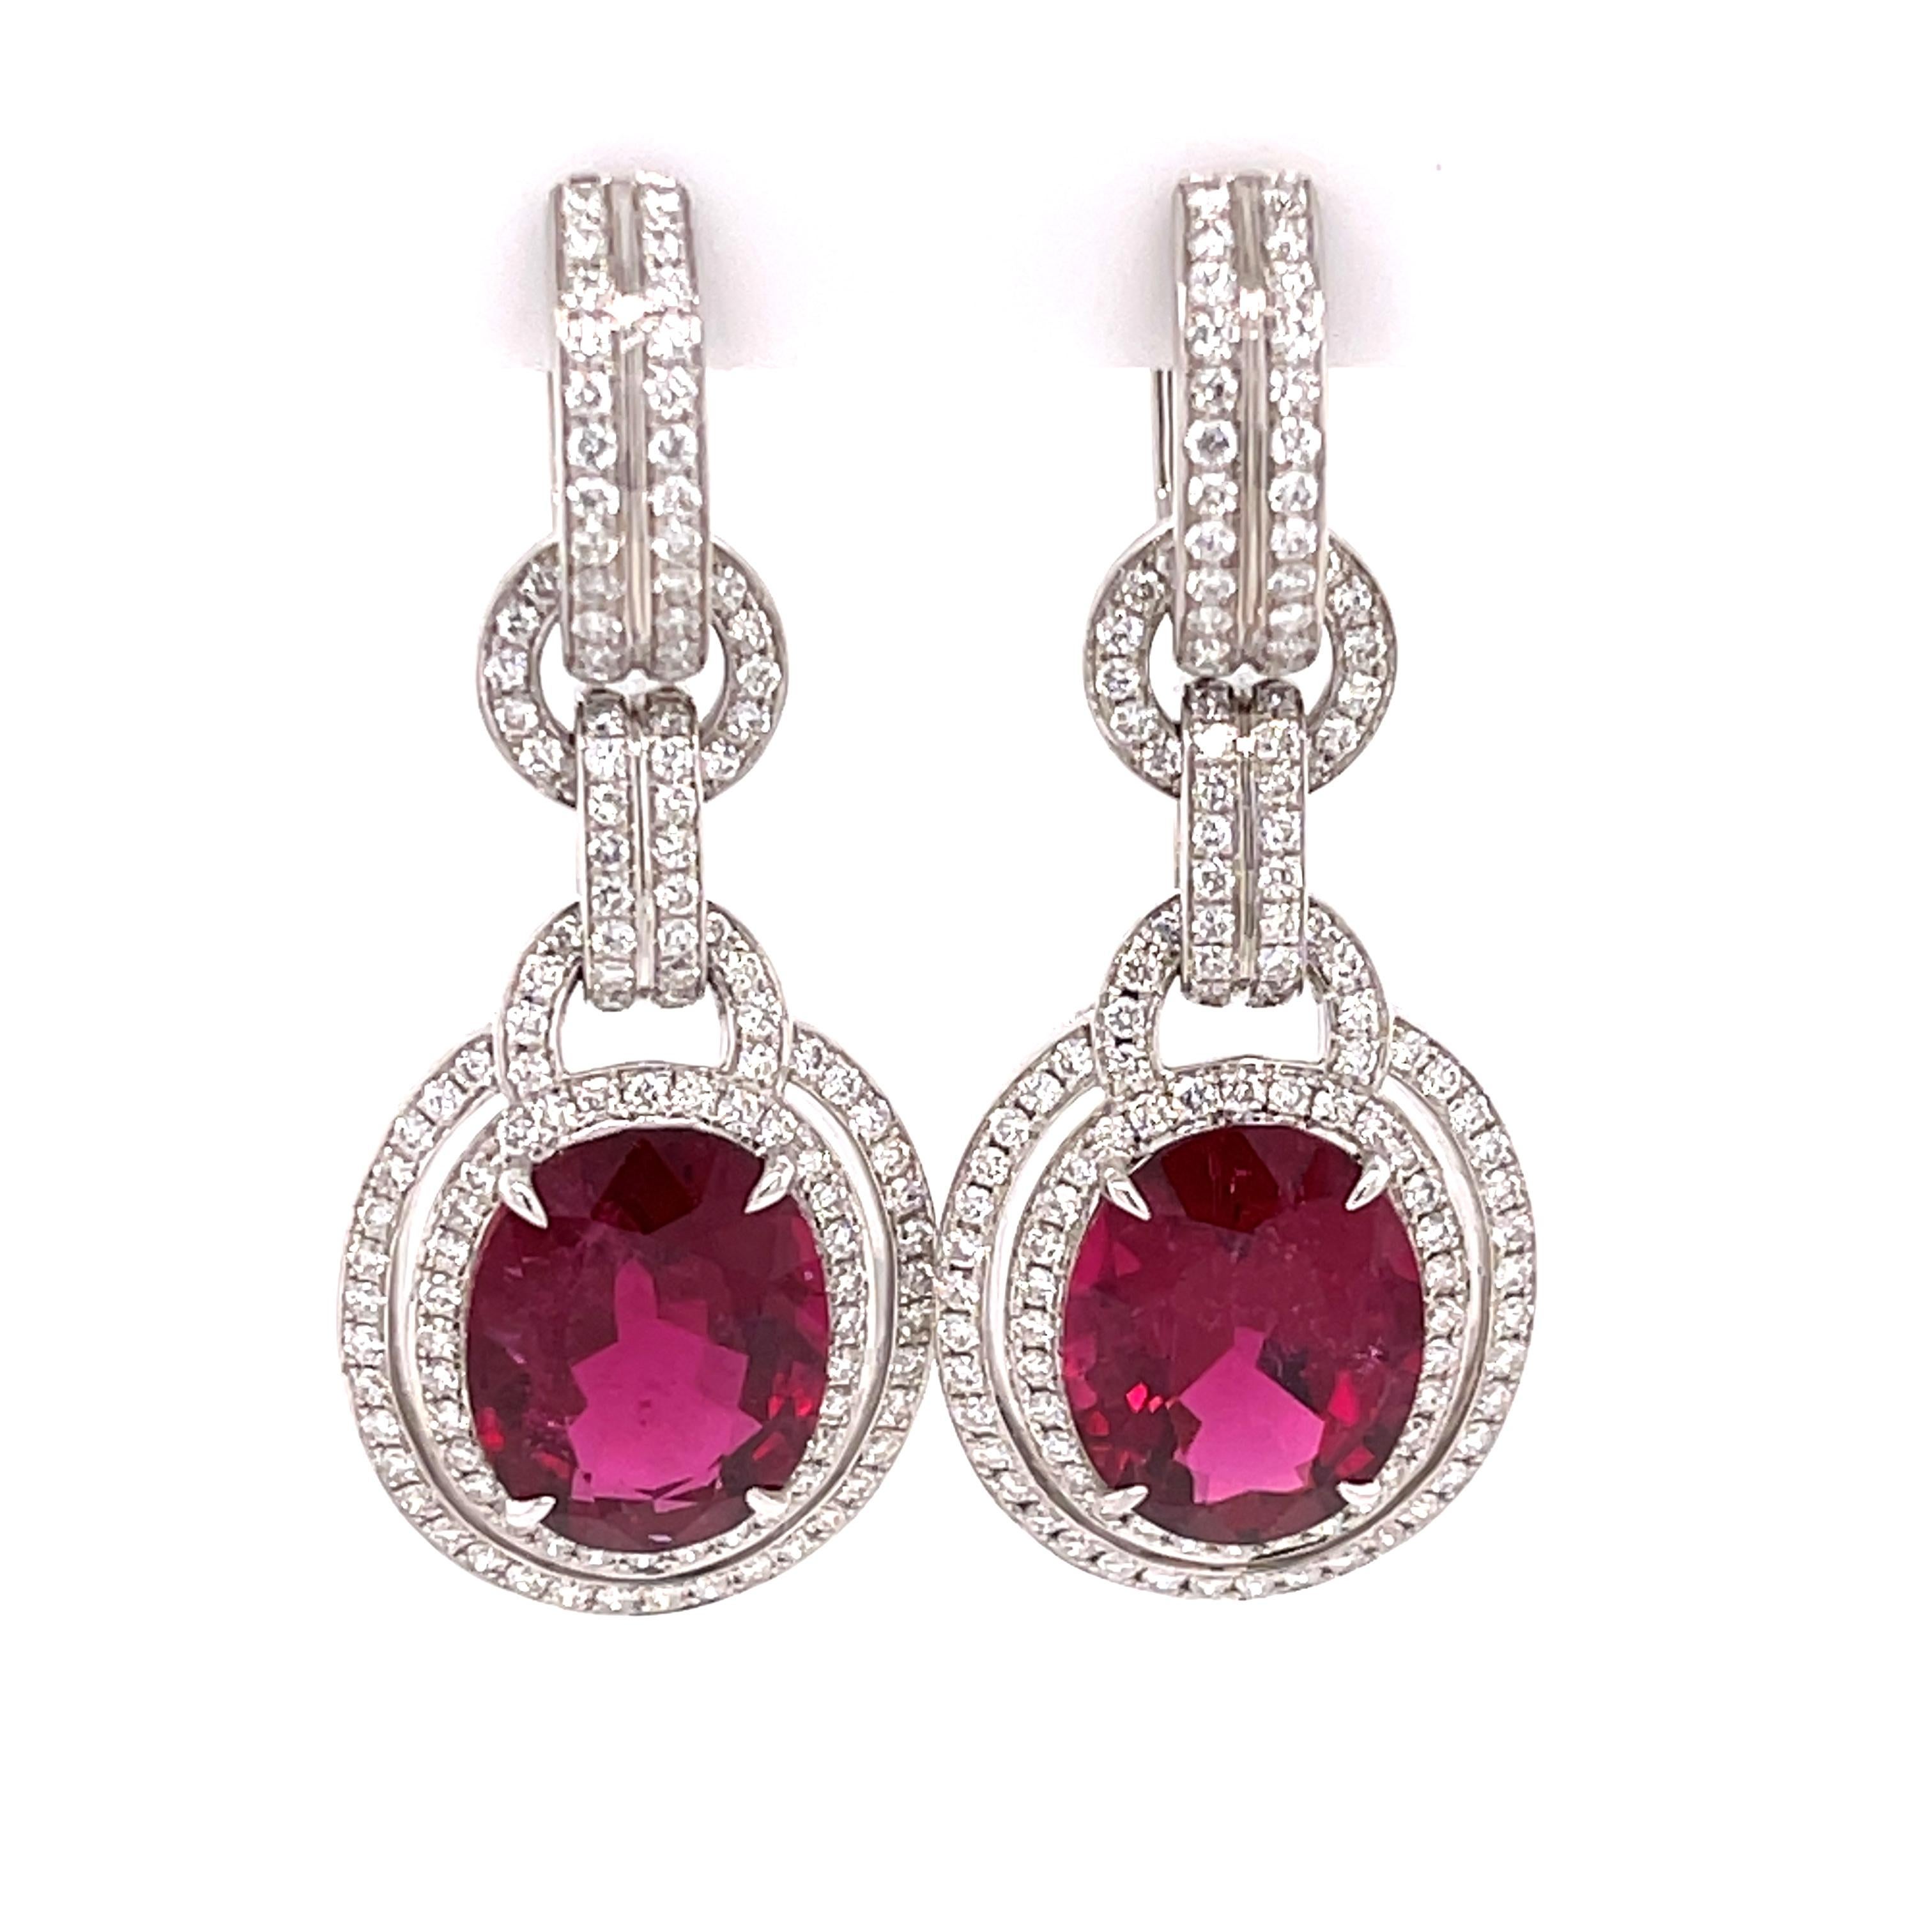 Robert Procop rubellite and diamond dangles in 18K white gold. The earrings feature two oval cut rubellites with 12.95ctw and 2.10ctw of diamonds. Stamped RP 4550 750.